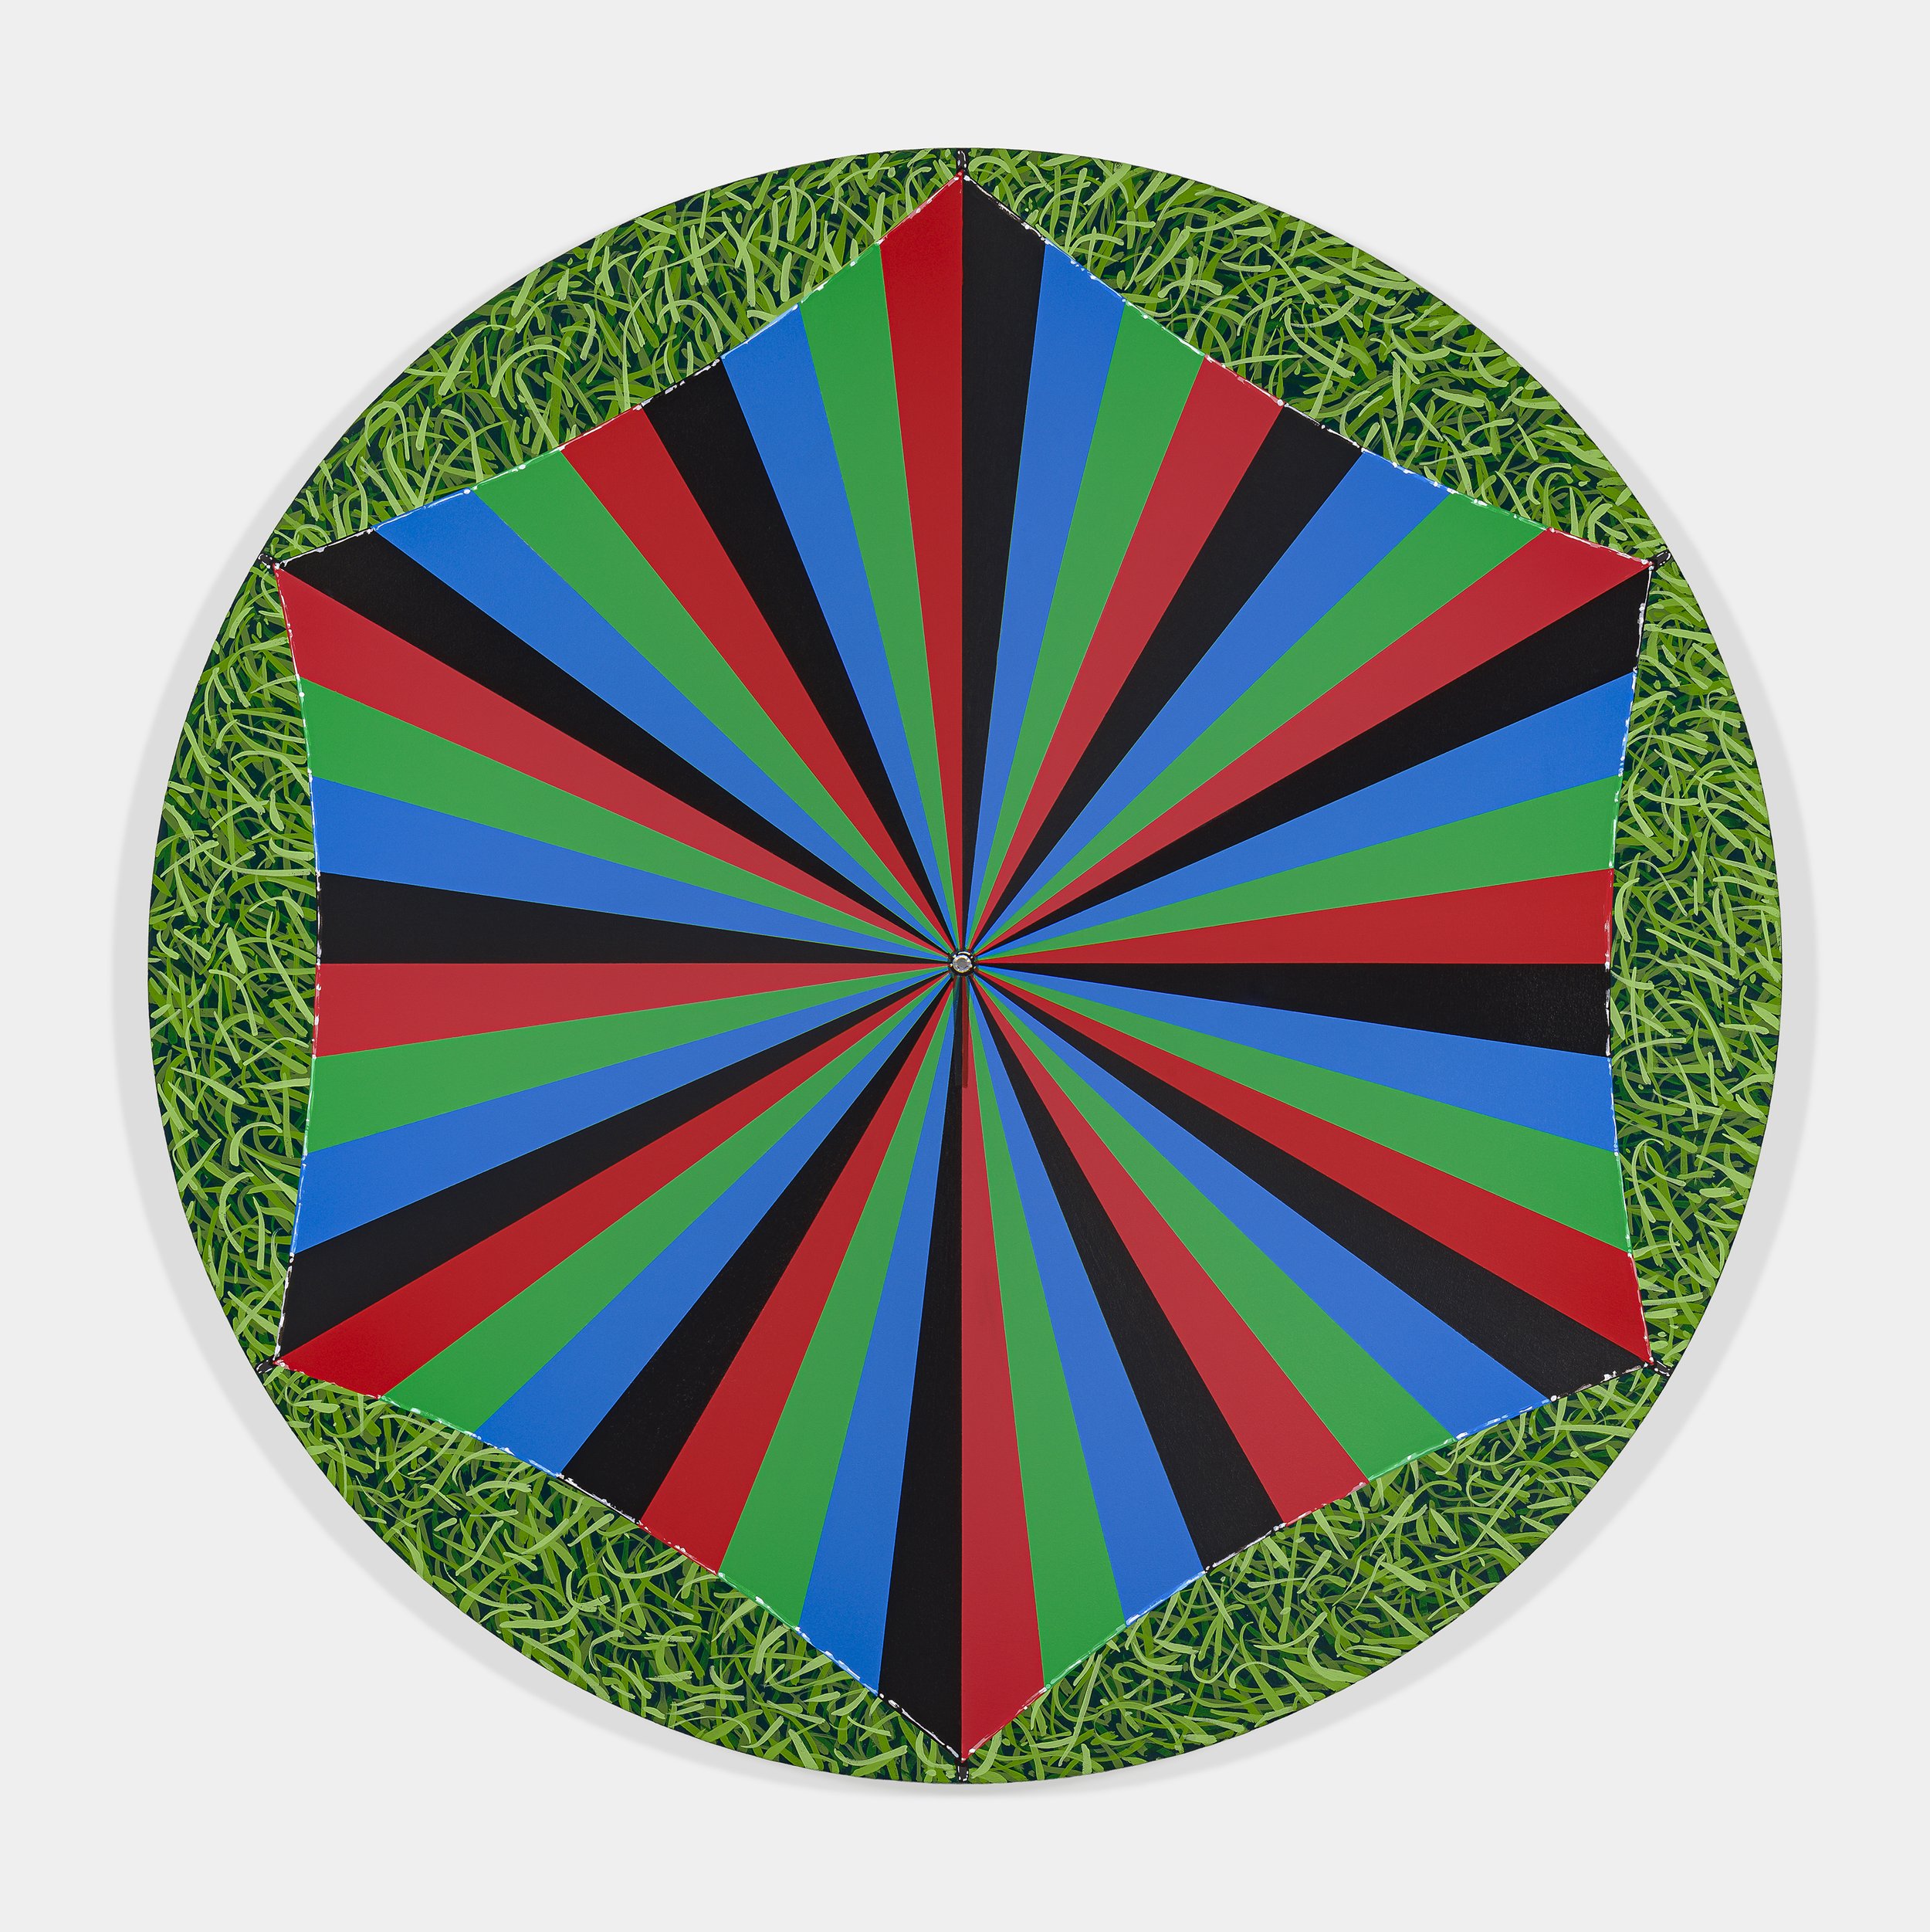 Parasol (Red, Green, Blue, and Black)